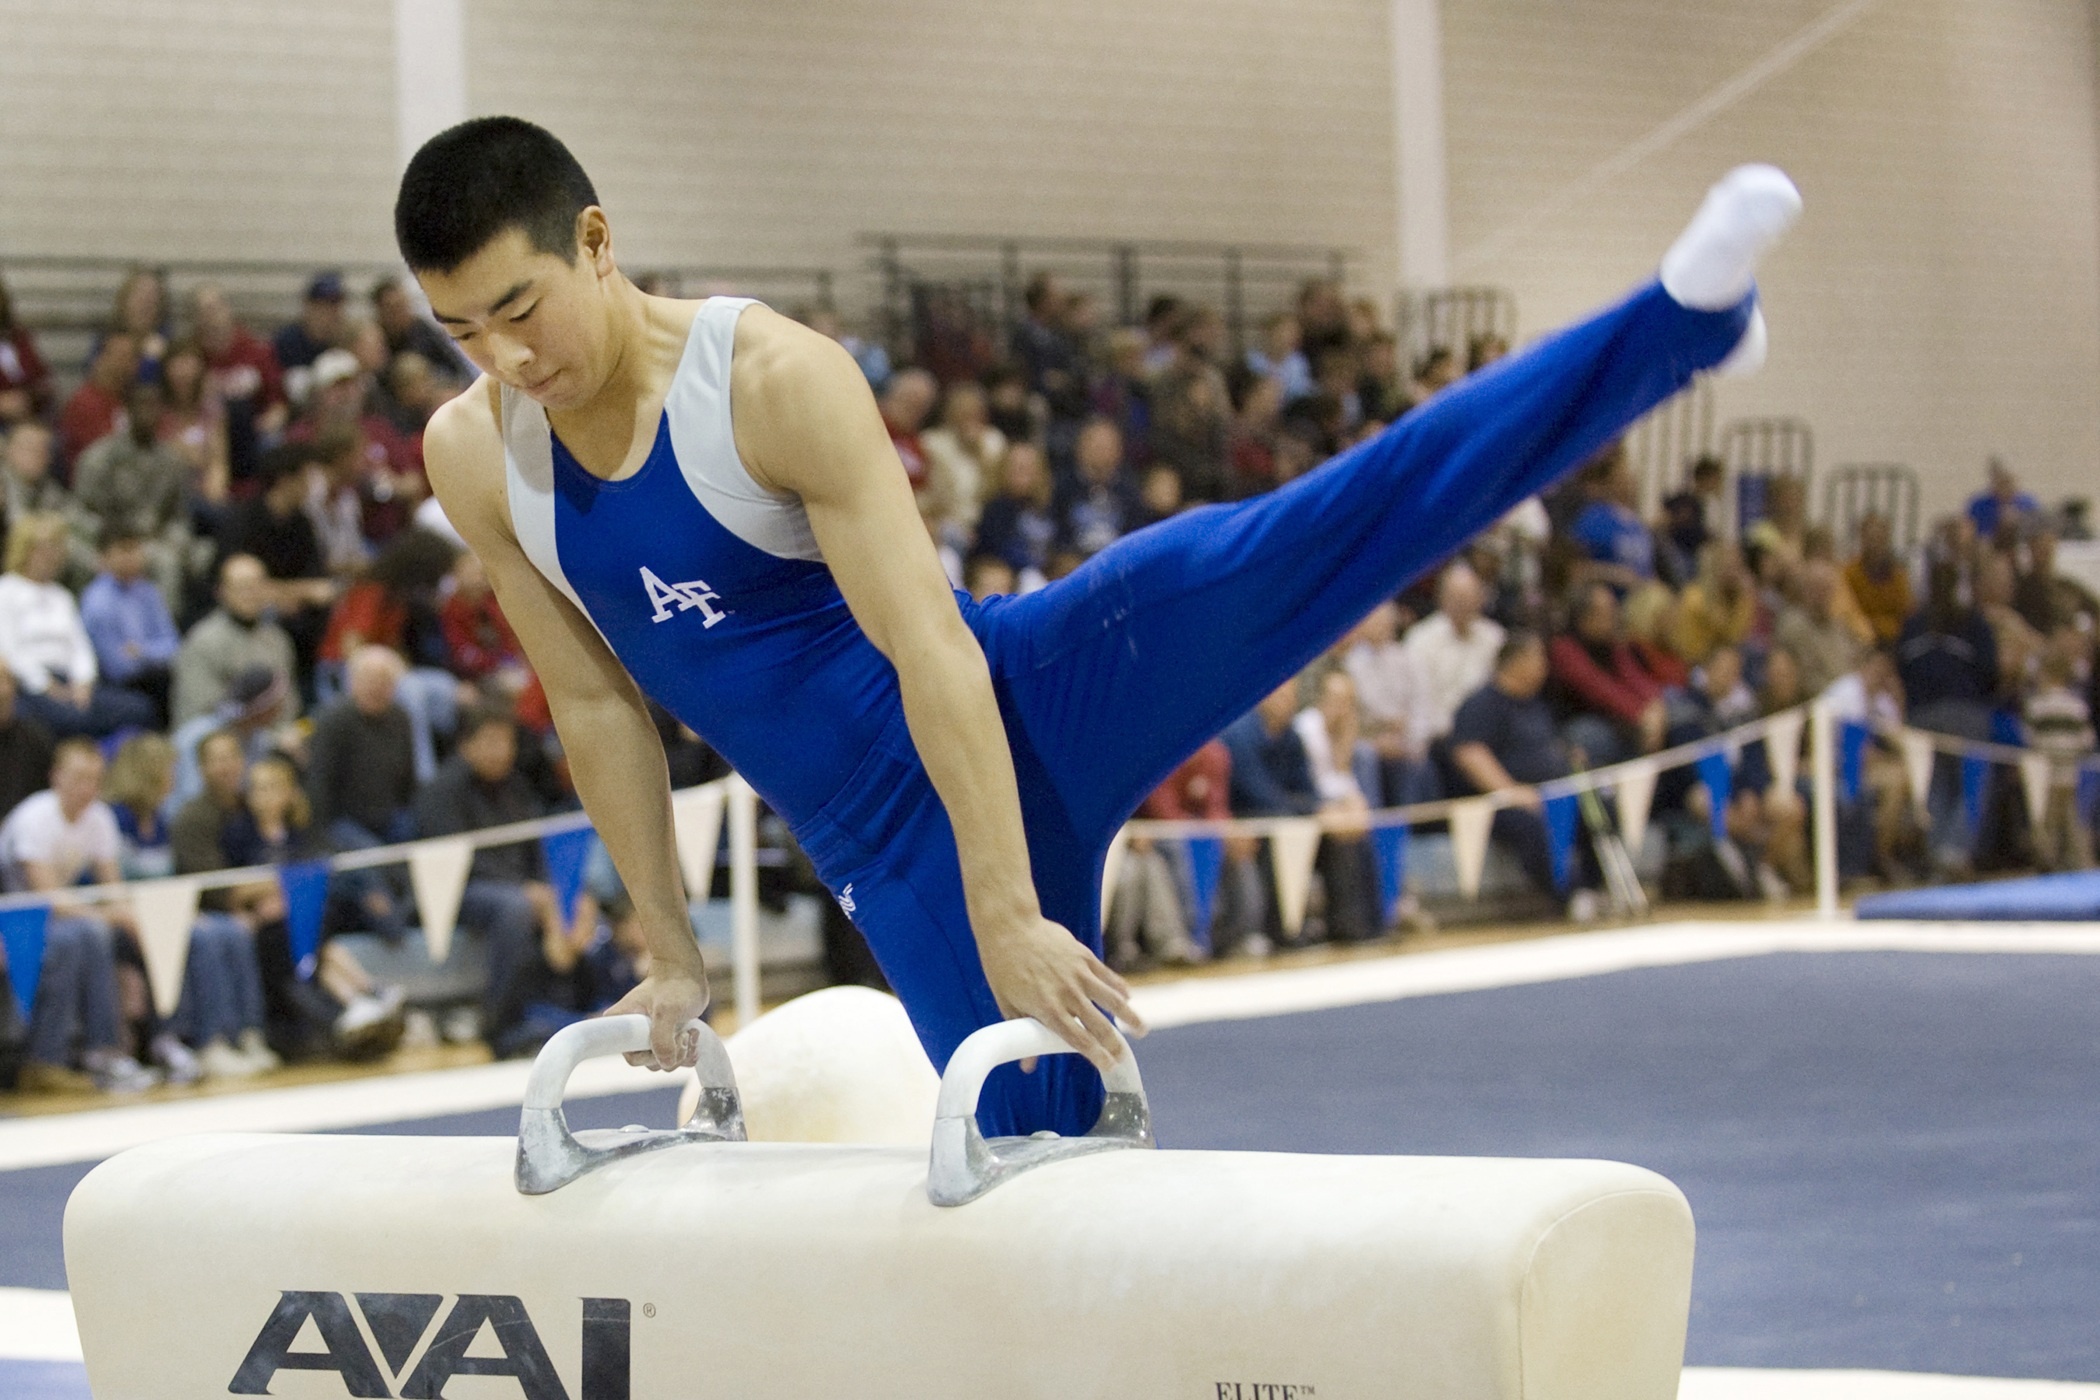 Pommel Horse (Gymnastics): Male gymnasts, Side and cross support travels, Most common elements. 2100x1400 HD Background.